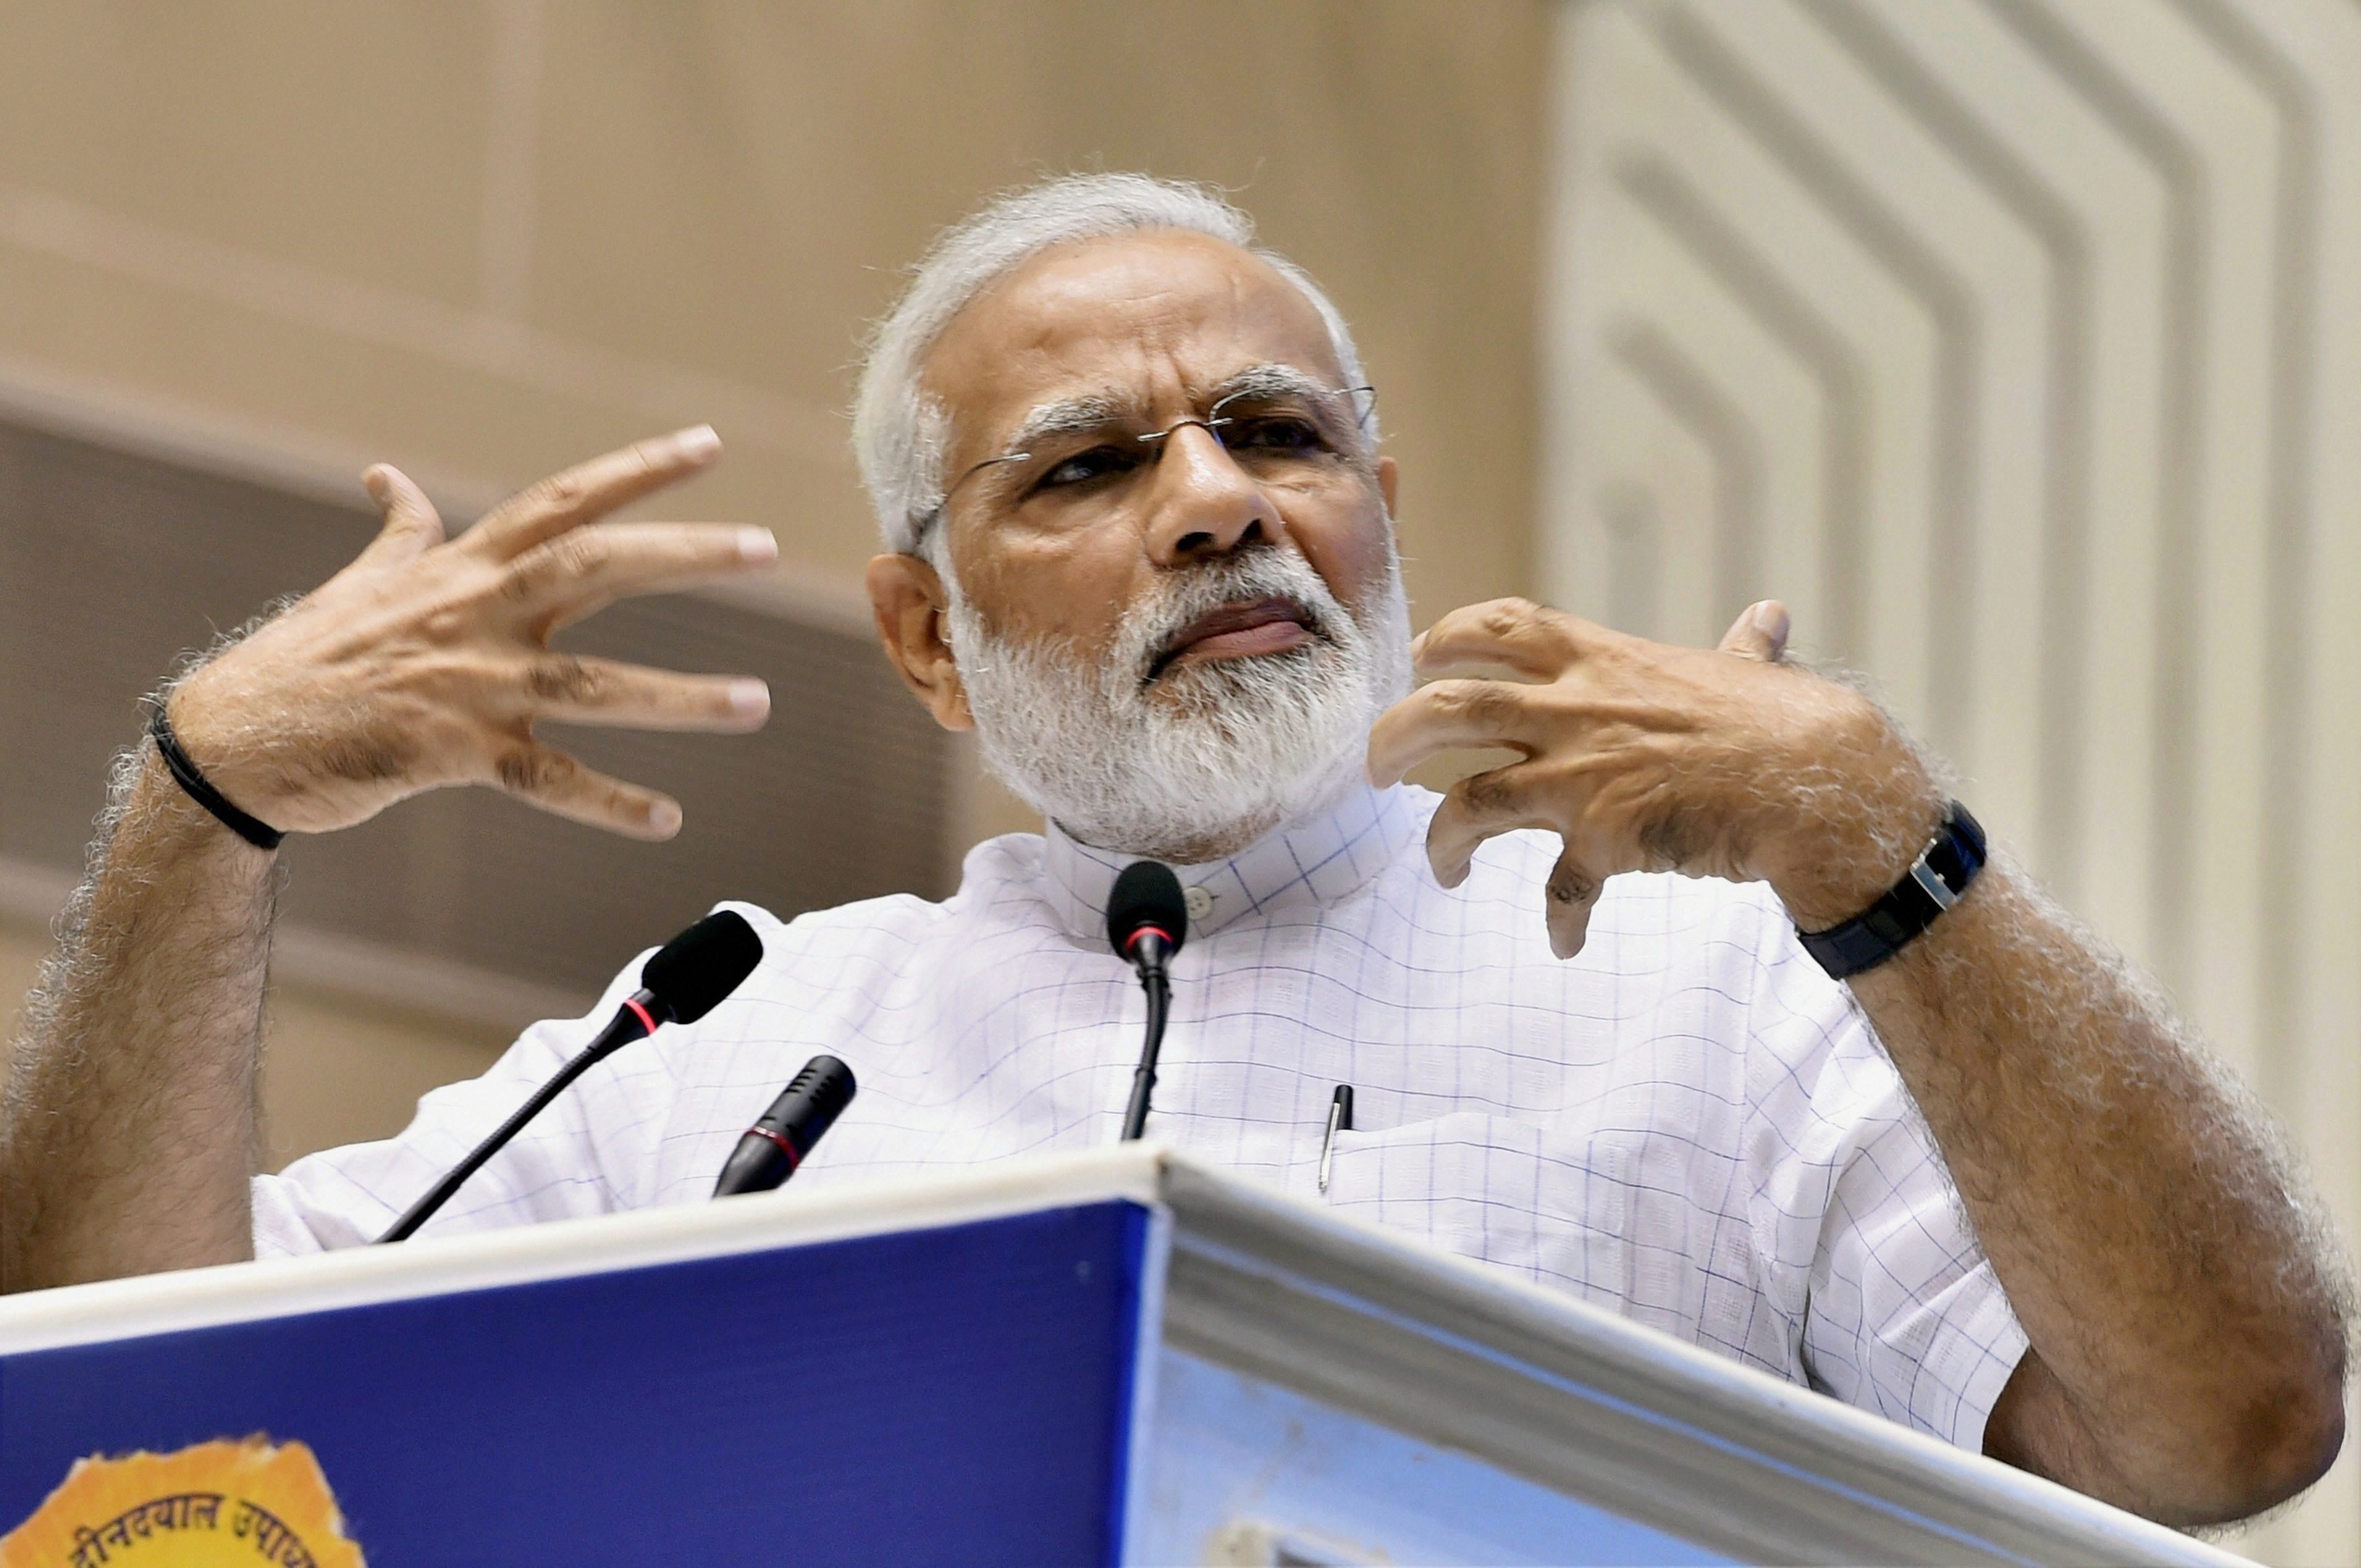 New Delhi: Prime Minister Narendra Modi addresses during a function on the occasion of 125th anniversary of Vivekananda's Chicago Address and birth centenary of Deendayal Upadhyay in New Delhi on Monday. PTI Photo by Shahbaz Khan (PTI9_11_2017_000061A)